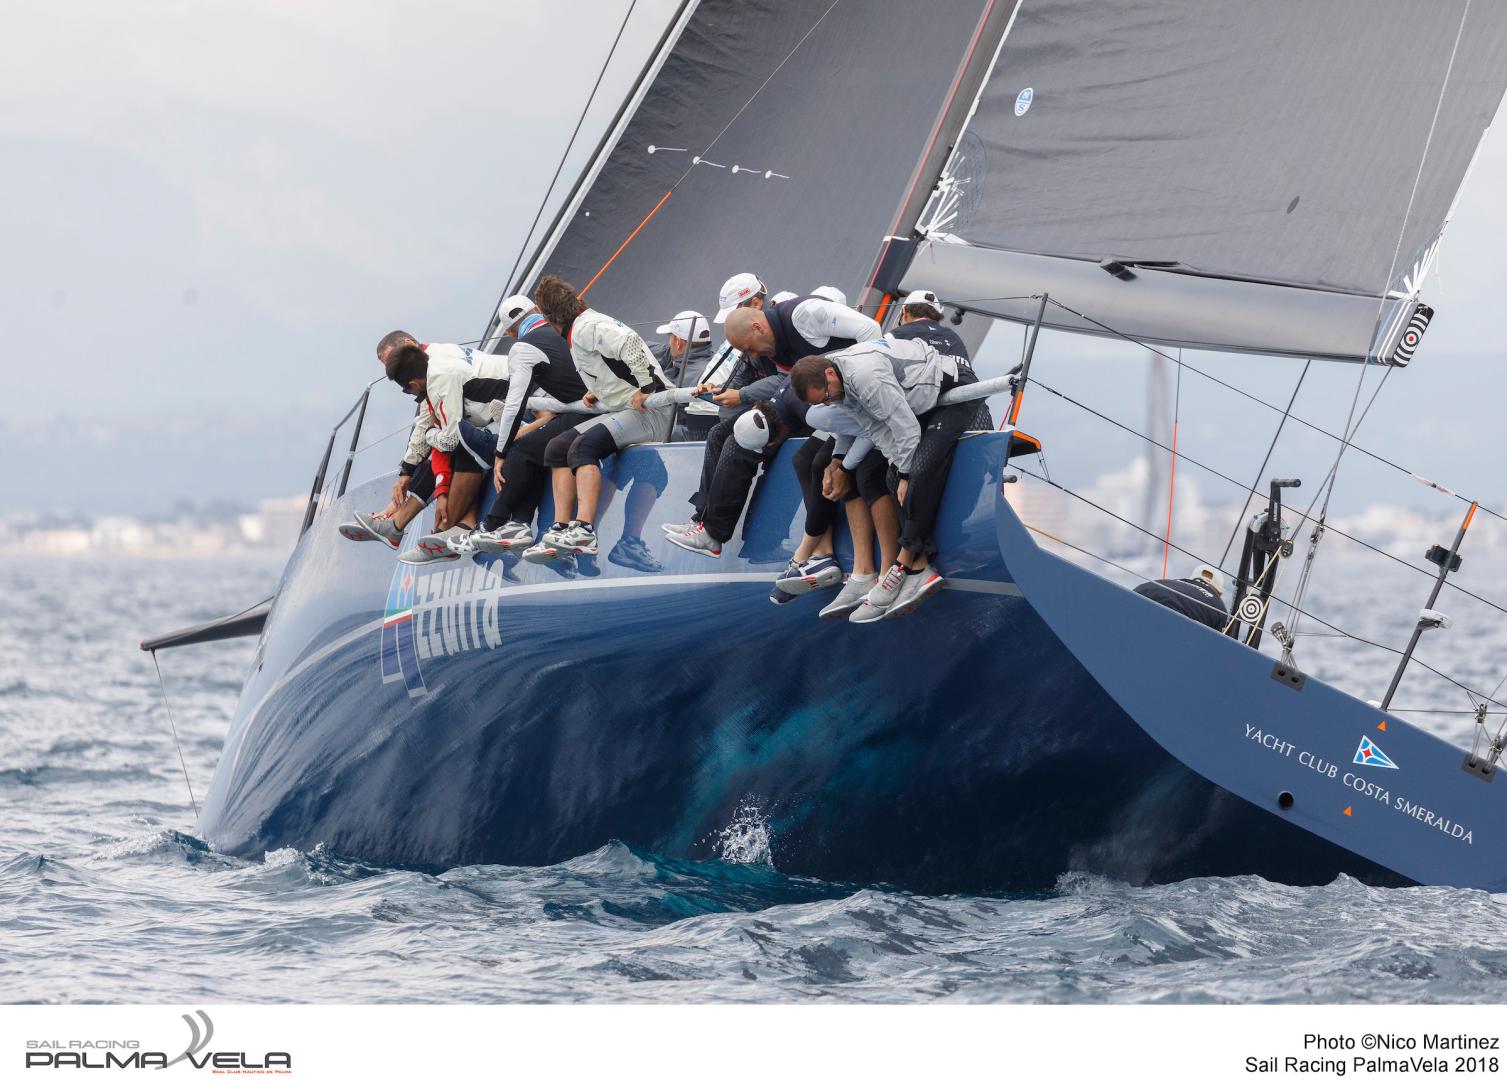 The Roemmers family’s' Argentinean team Azzurra will defend its title at 16th Sail Racing PalmaVela